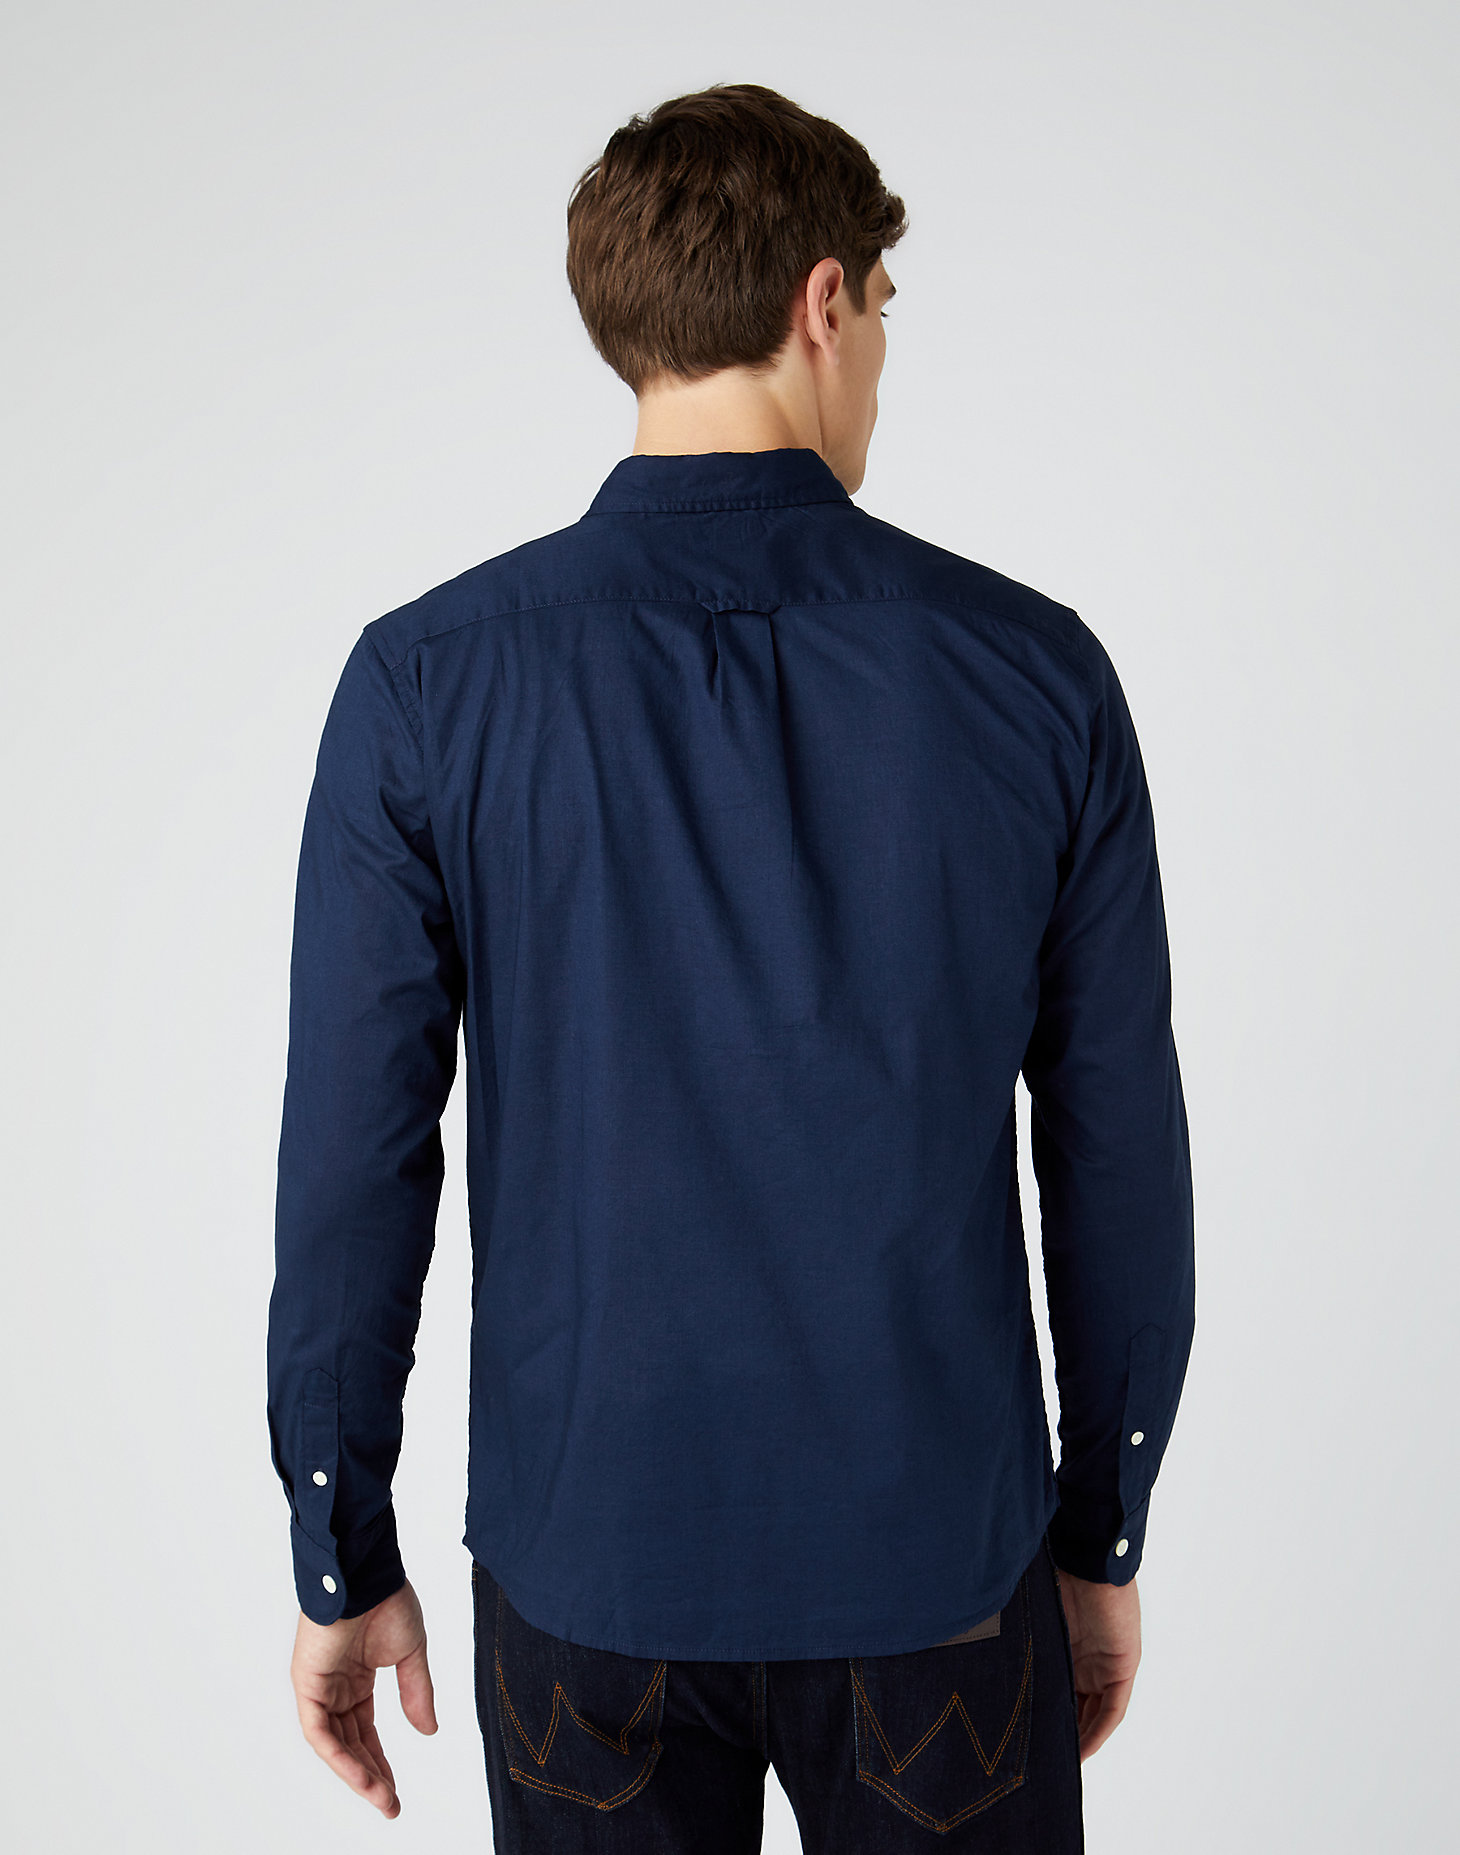 Long Sleeve One Pocket Shirt in Navy alternative view 3